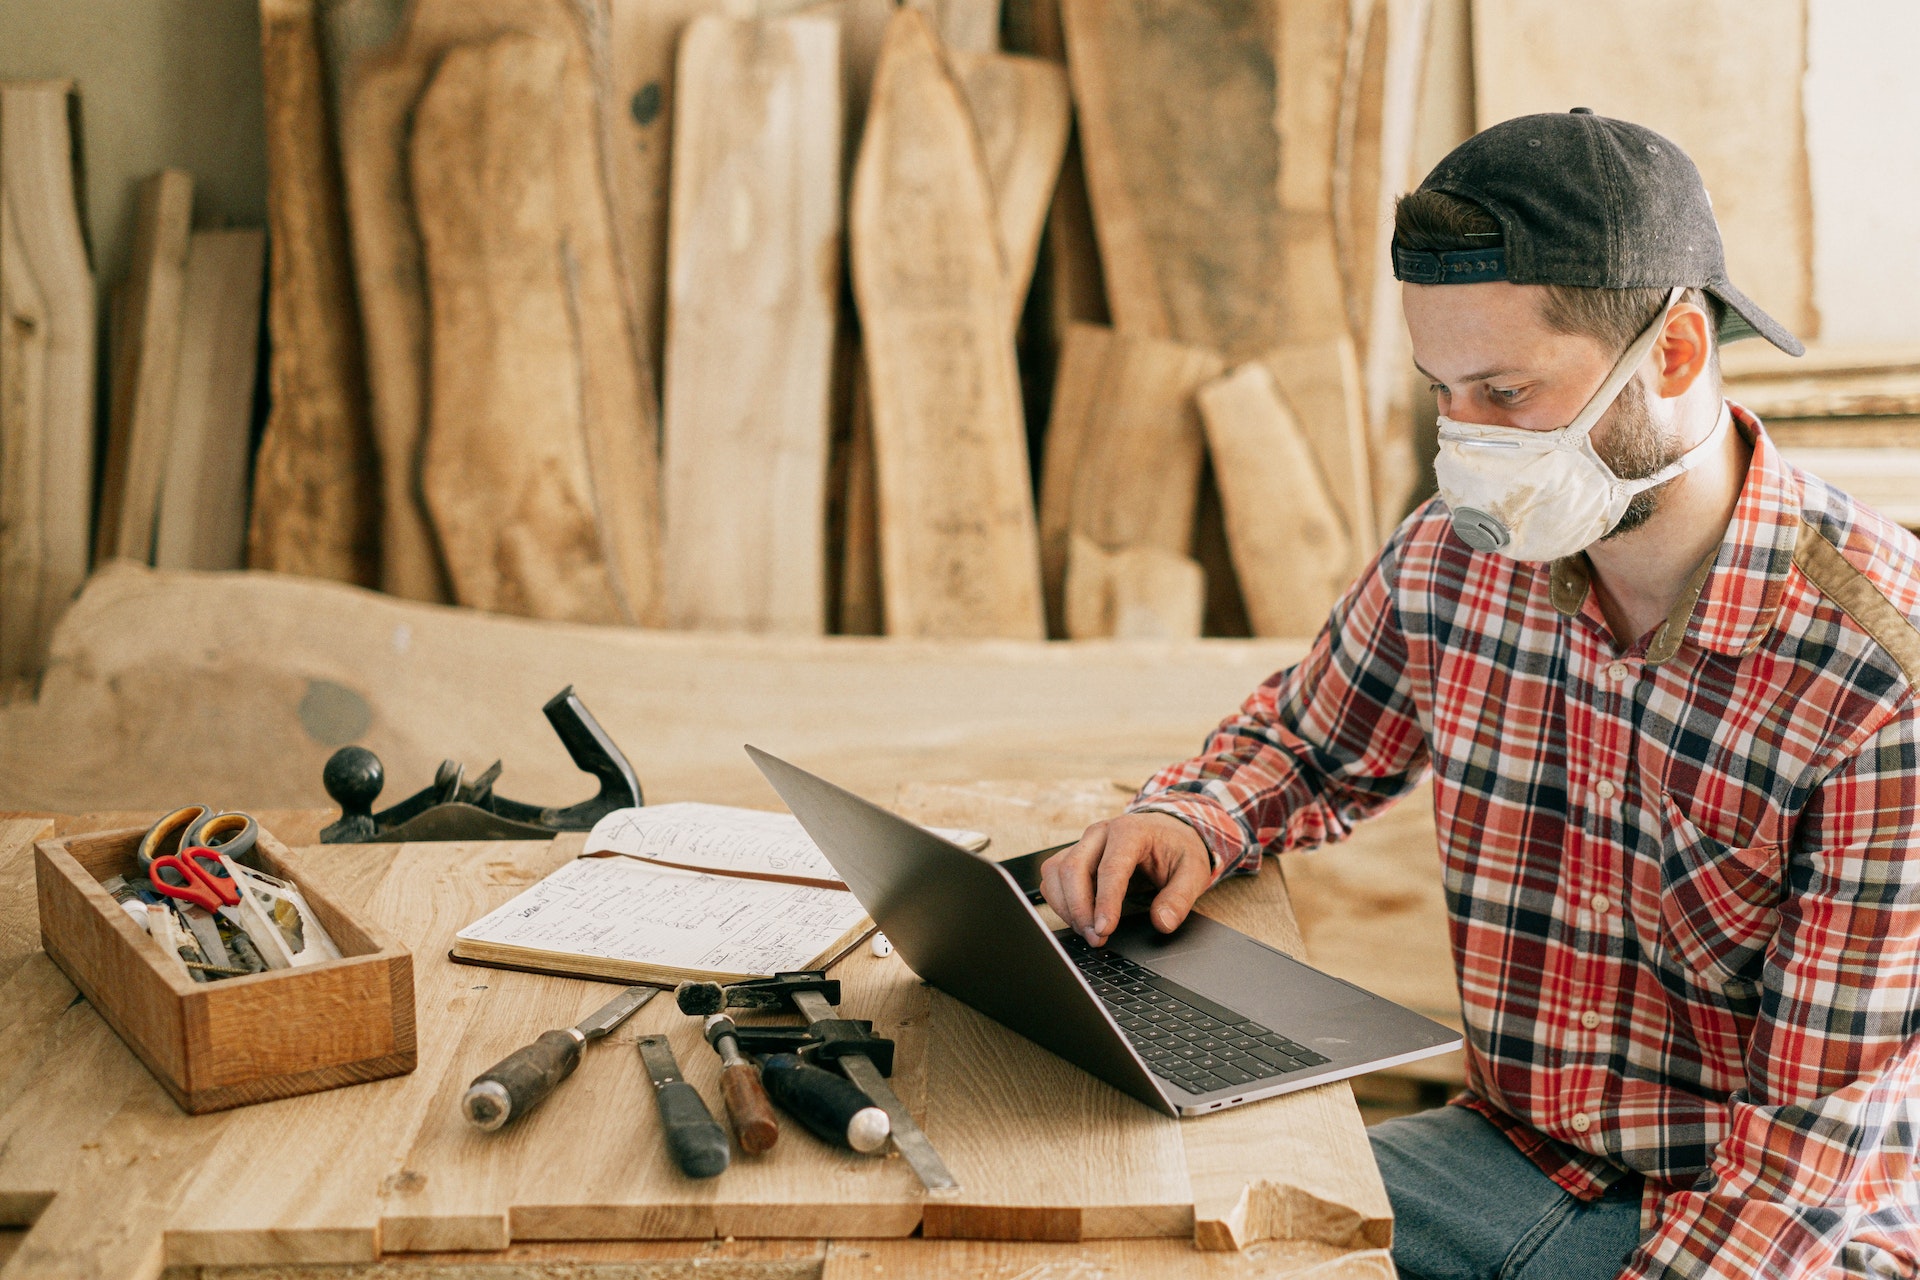 A person using a laptop at a wood workshop | Source: Pexels